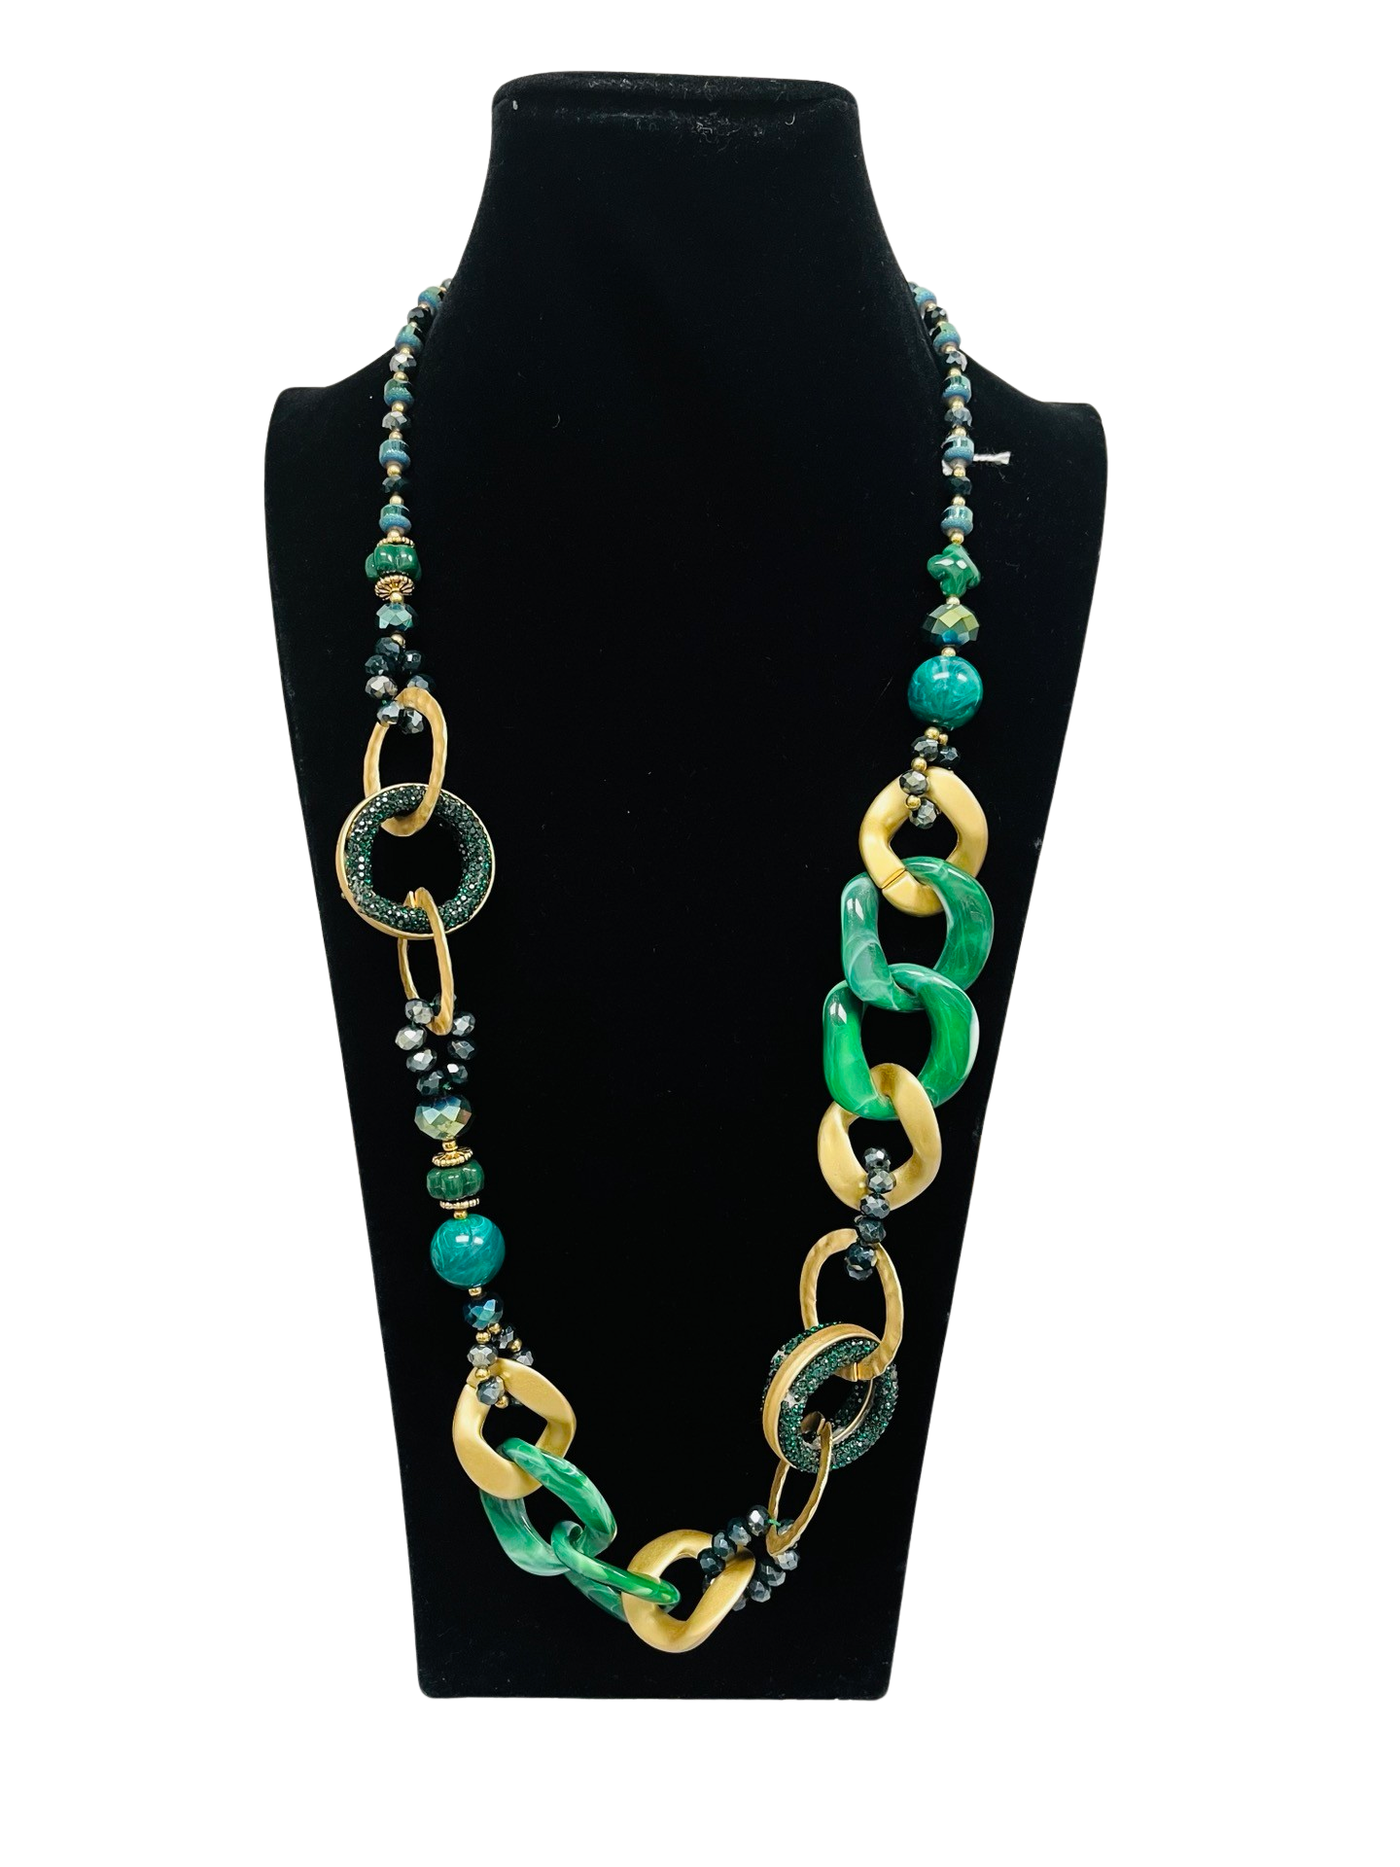 Green & Gold Long Statement Necklace